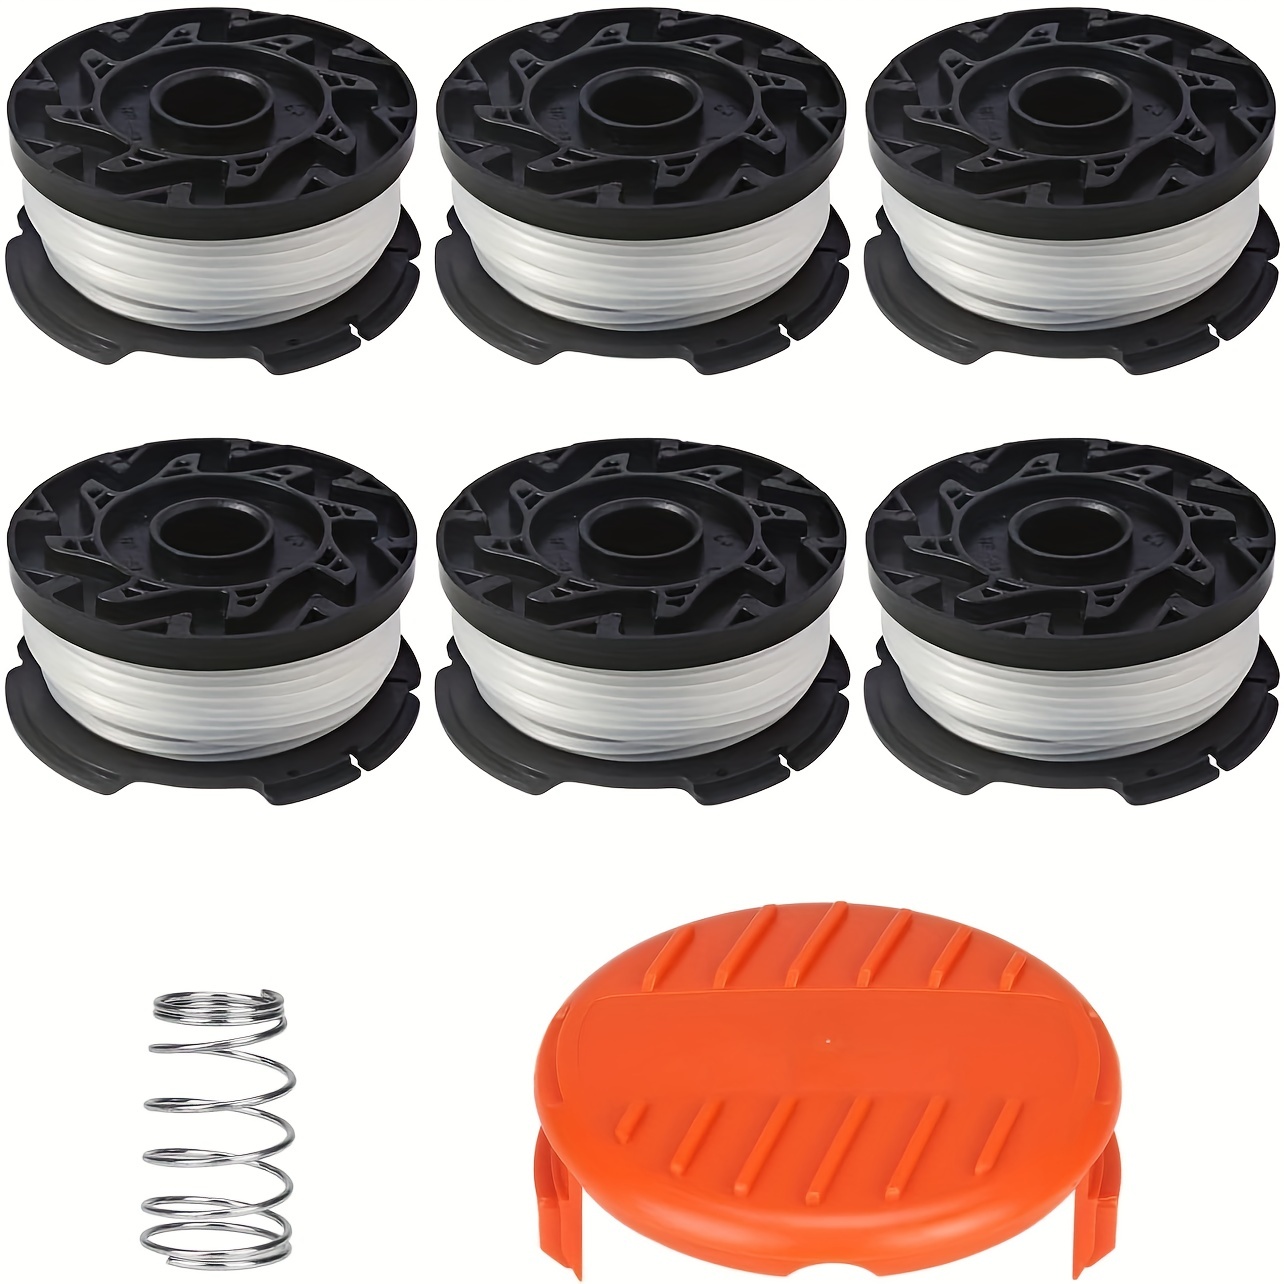 Af-100 Replacement Spools Compatible With Black+decker Gh600 Gh900